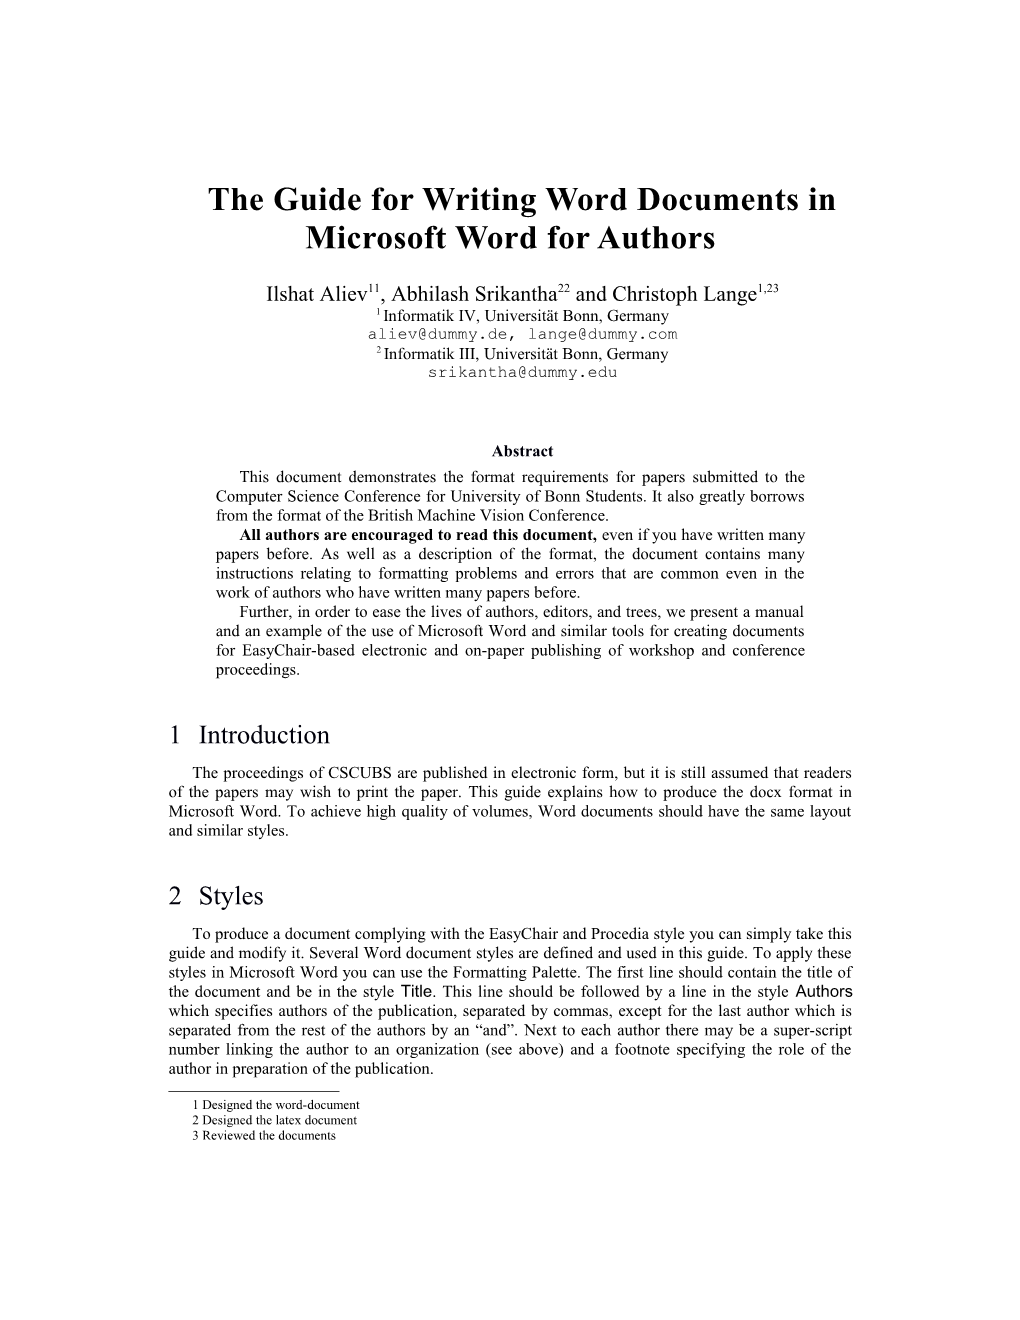 The Guide for Writing Word Documents in Microsoft Word for Authors